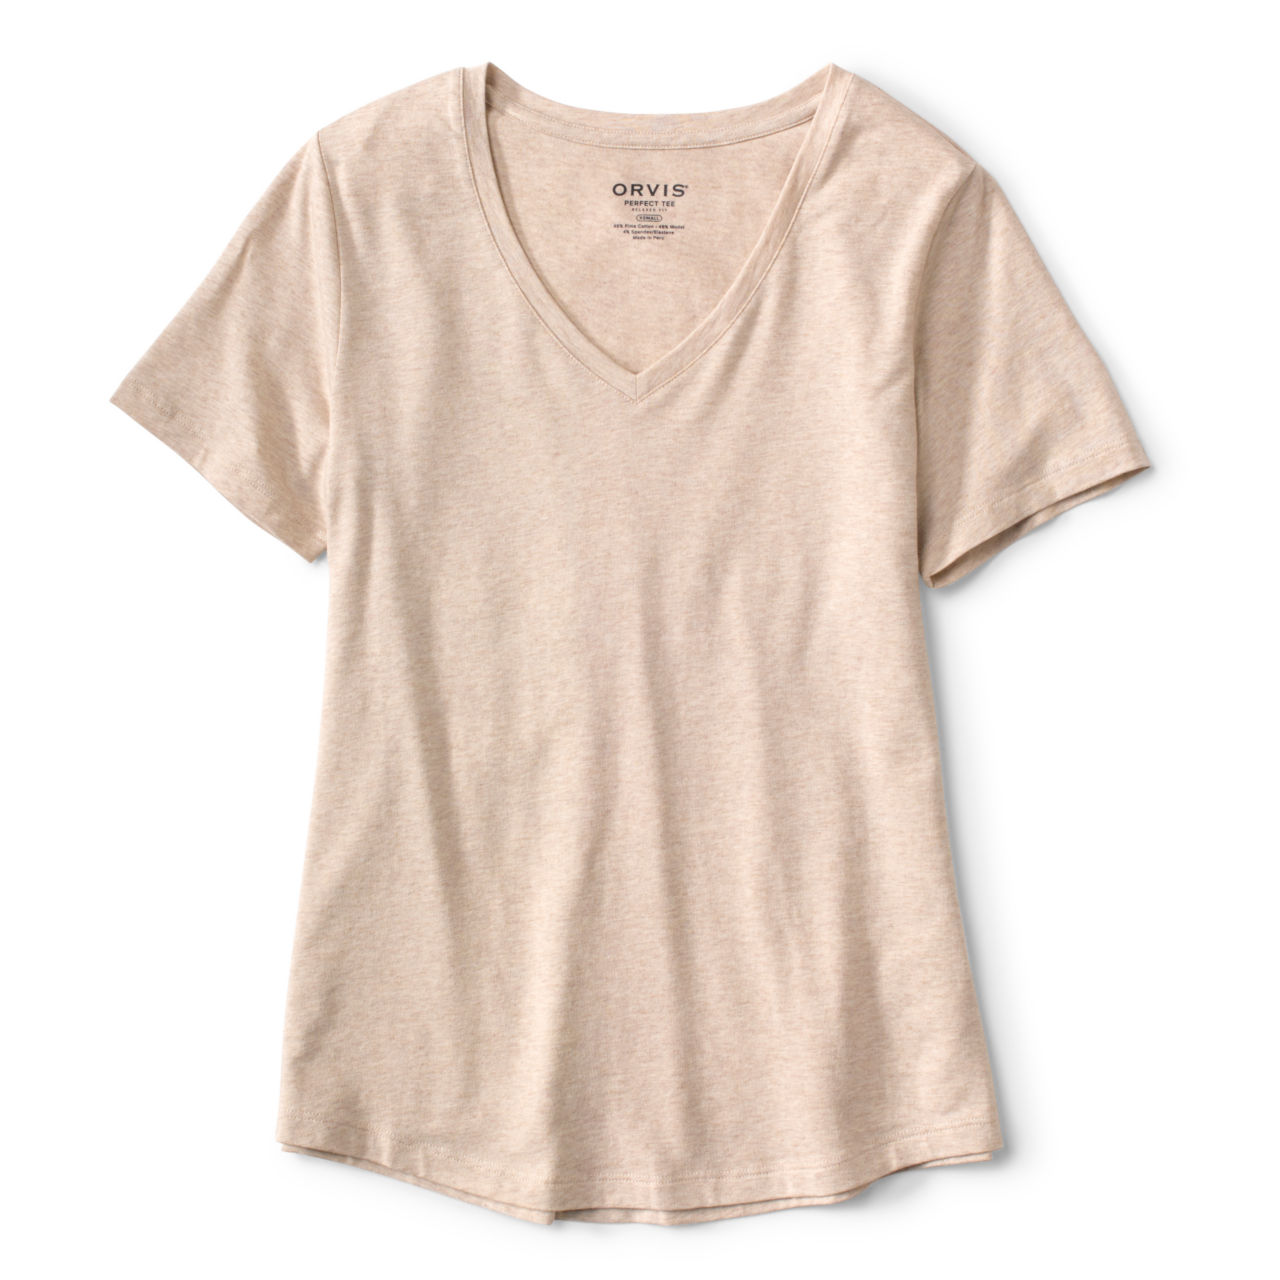 Perfect Relaxed V-Neck Short-Sleeved Tee - OATMEAL HEATHER image number 0